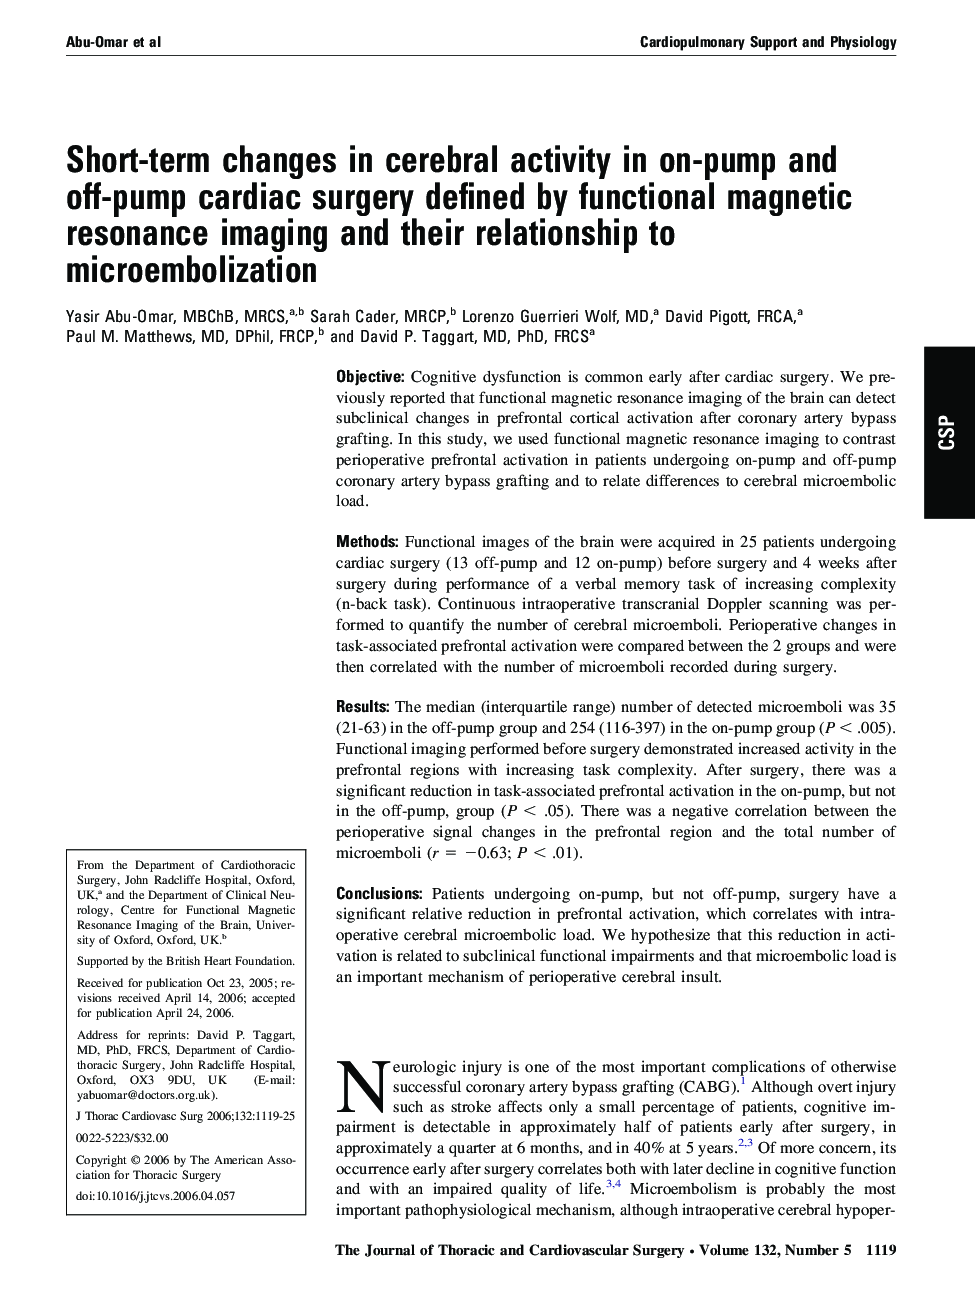 Short-term changes in cerebral activity in on-pump and off-pump cardiac surgery defined by functional magnetic resonance imaging and their relationship to microembolization 